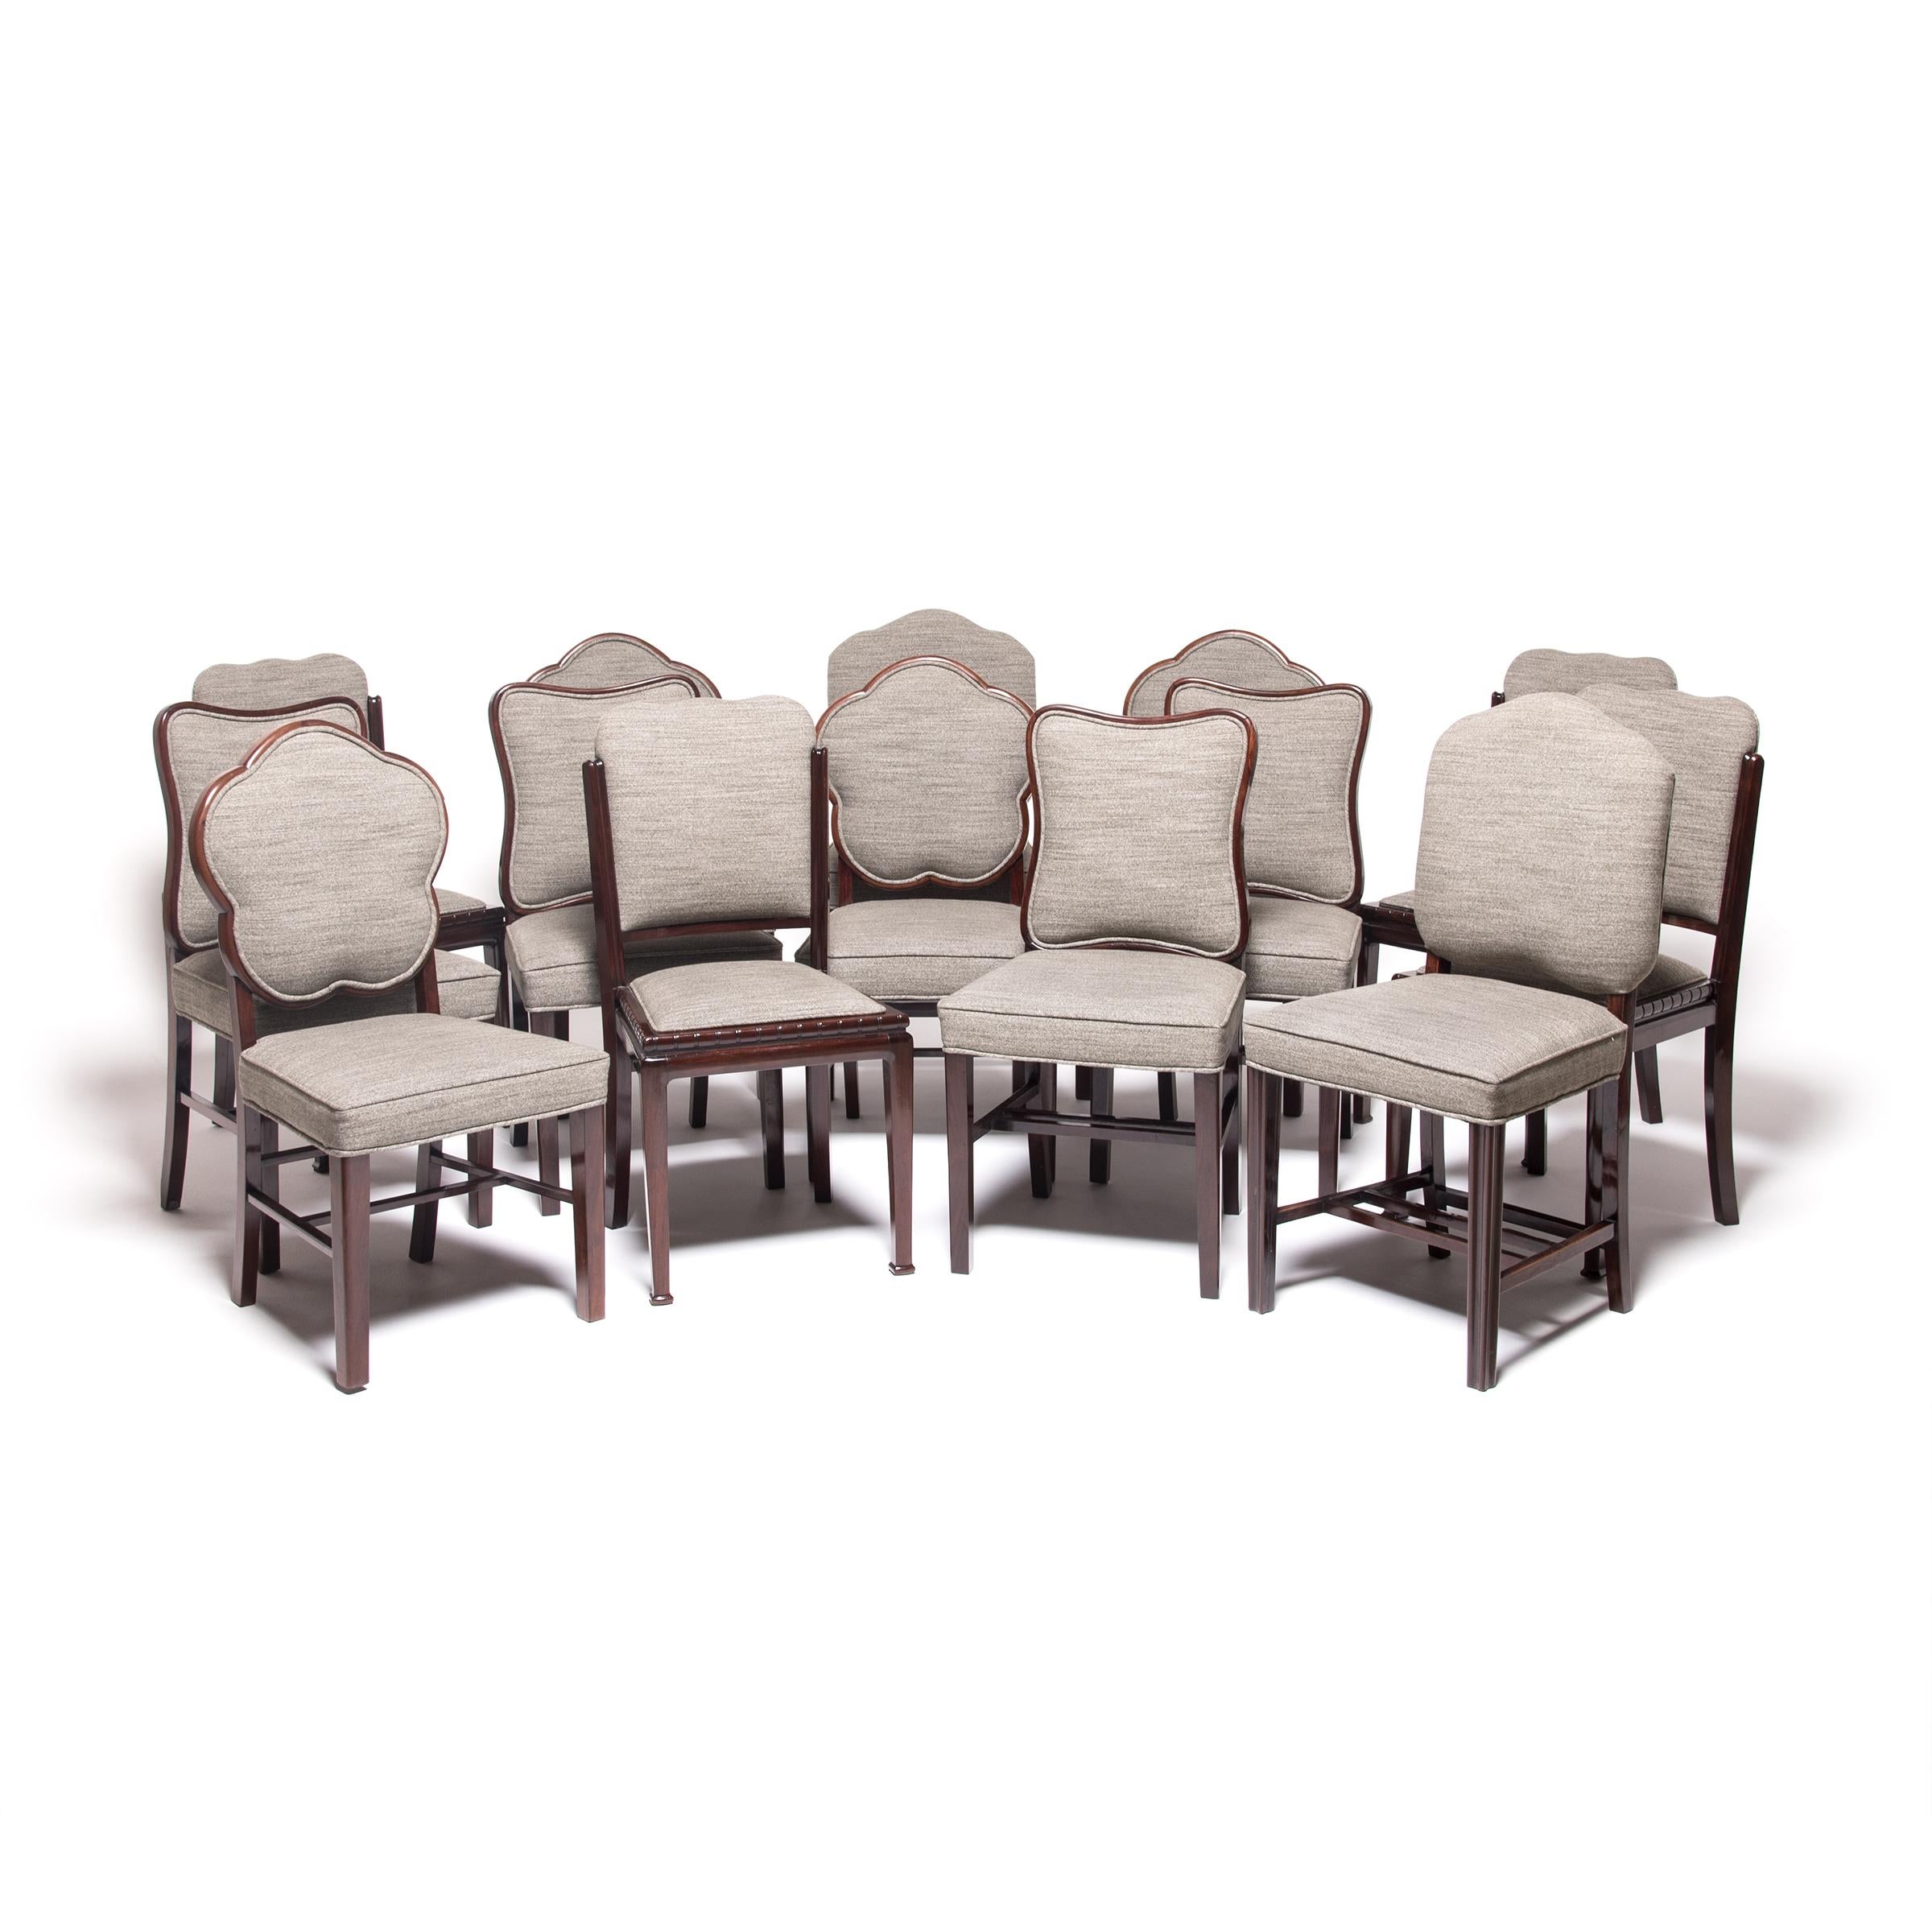 Set of Four Chinese Deco Dining Chairs, circa 1930s For Sale 2